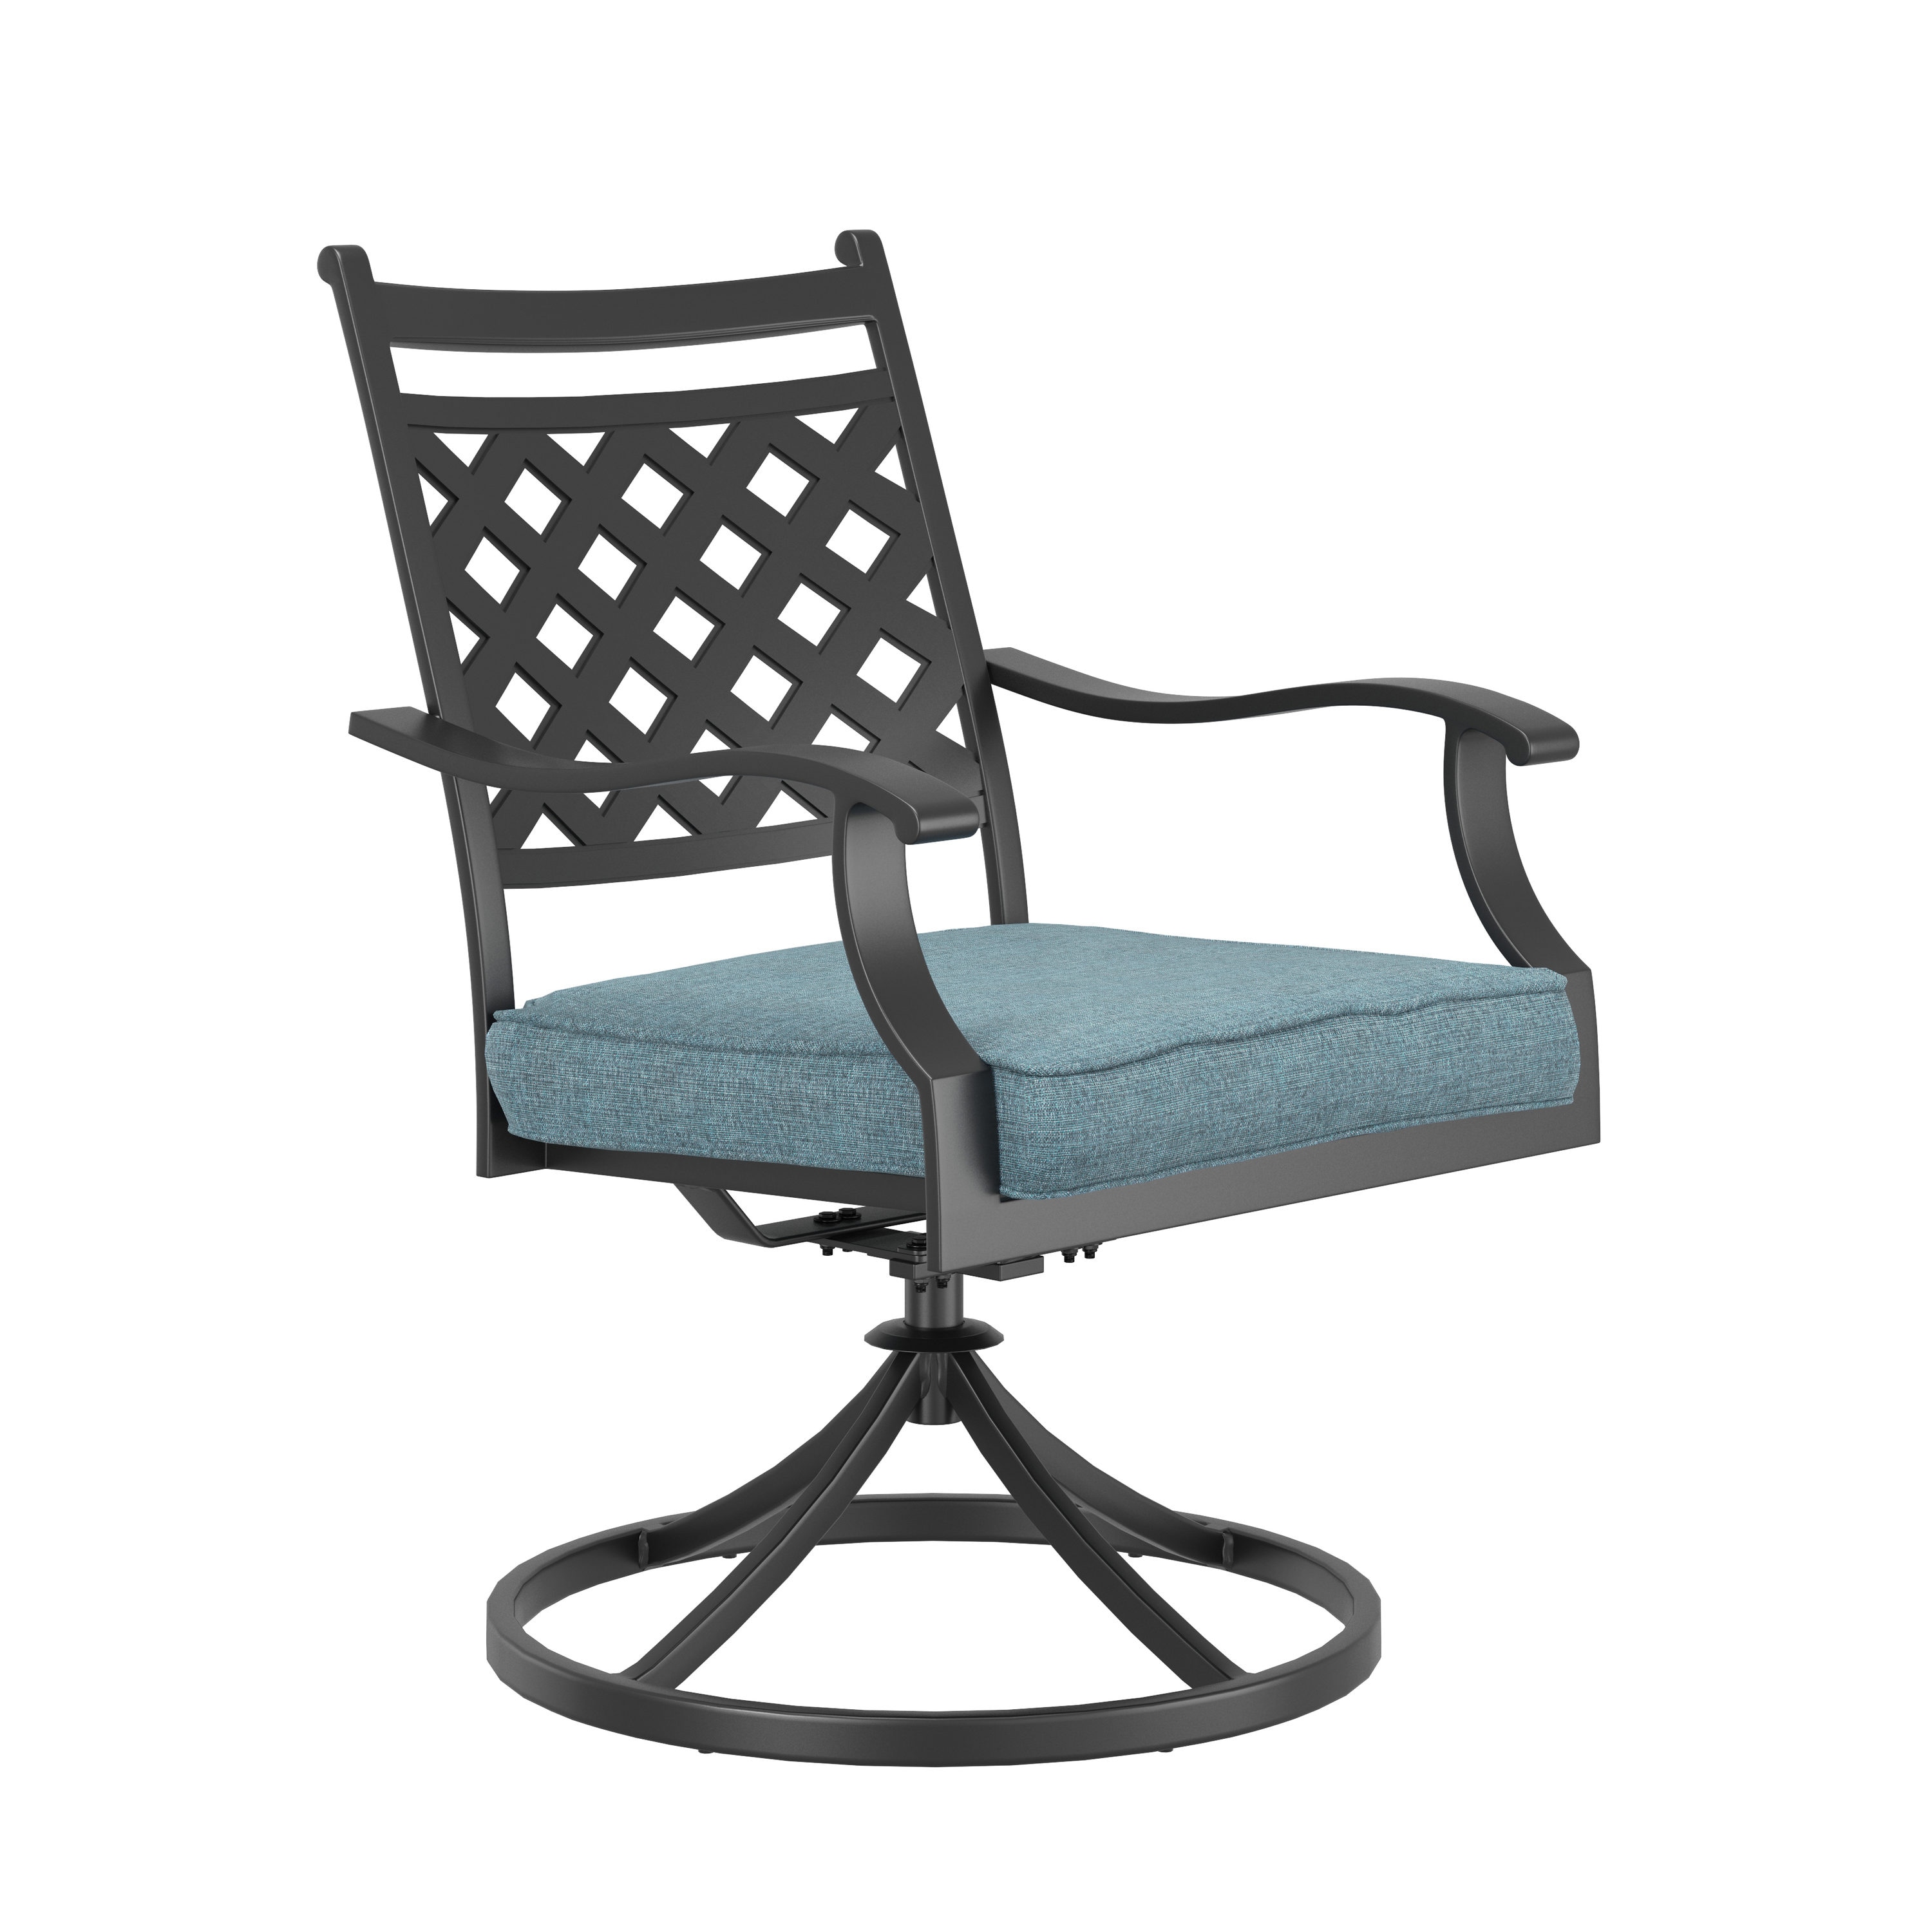 Wrought Iron Patio Furniture At Lowes.Com